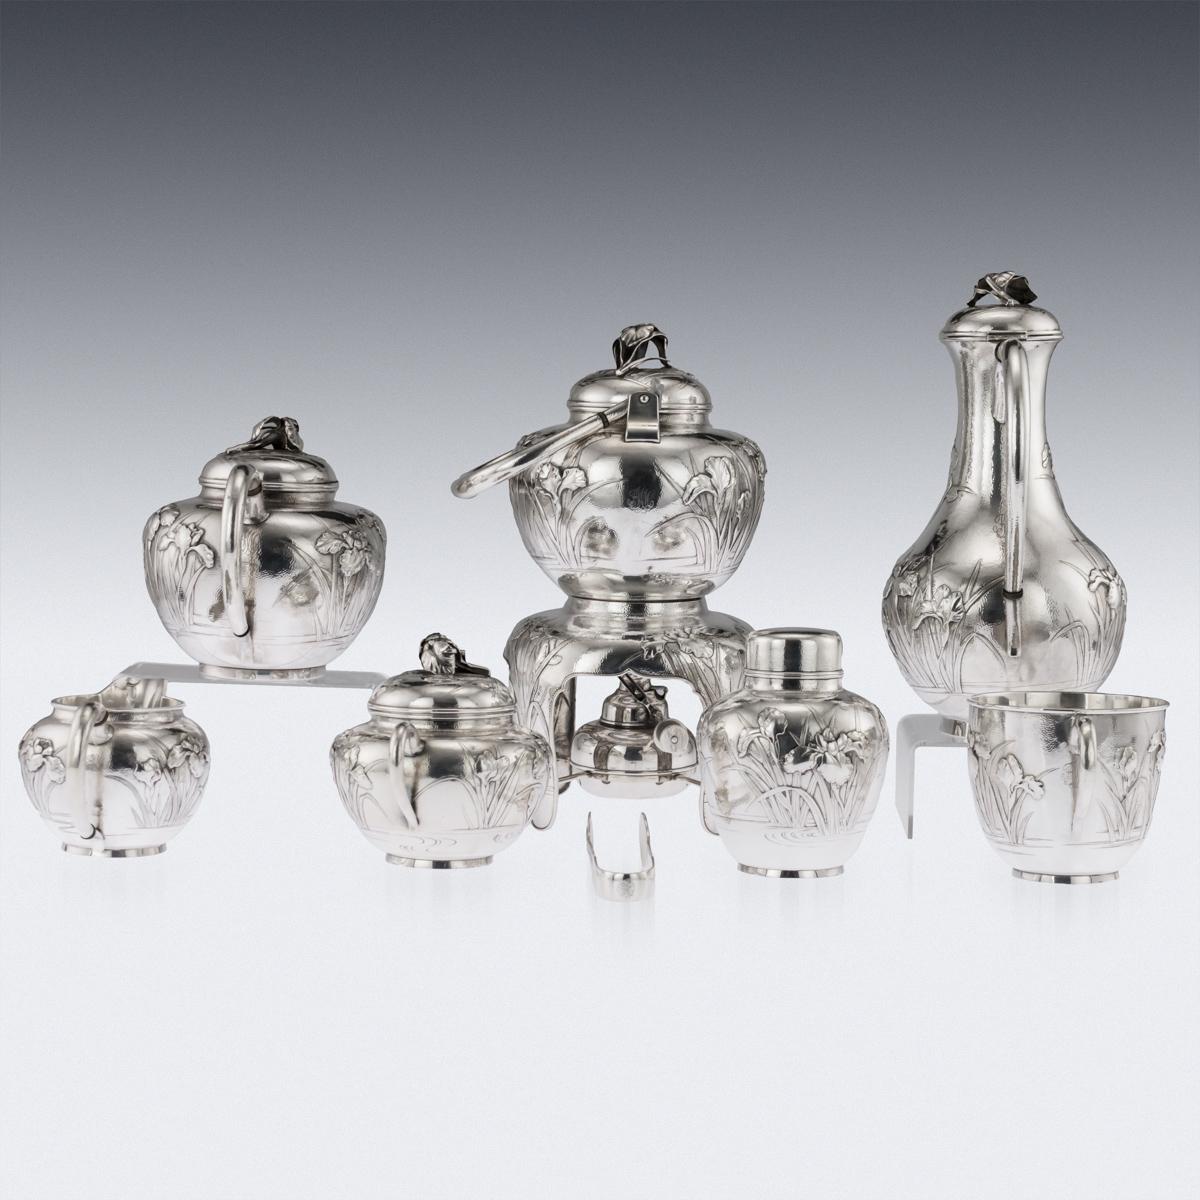 Antique early 20th century Japanese solid silver massive eight-piece tea & coffee service on tray, exceptional and magnificent quality, double walled, embossed and applied with Iris flowers in high relief, with elegant C-form handles and lids